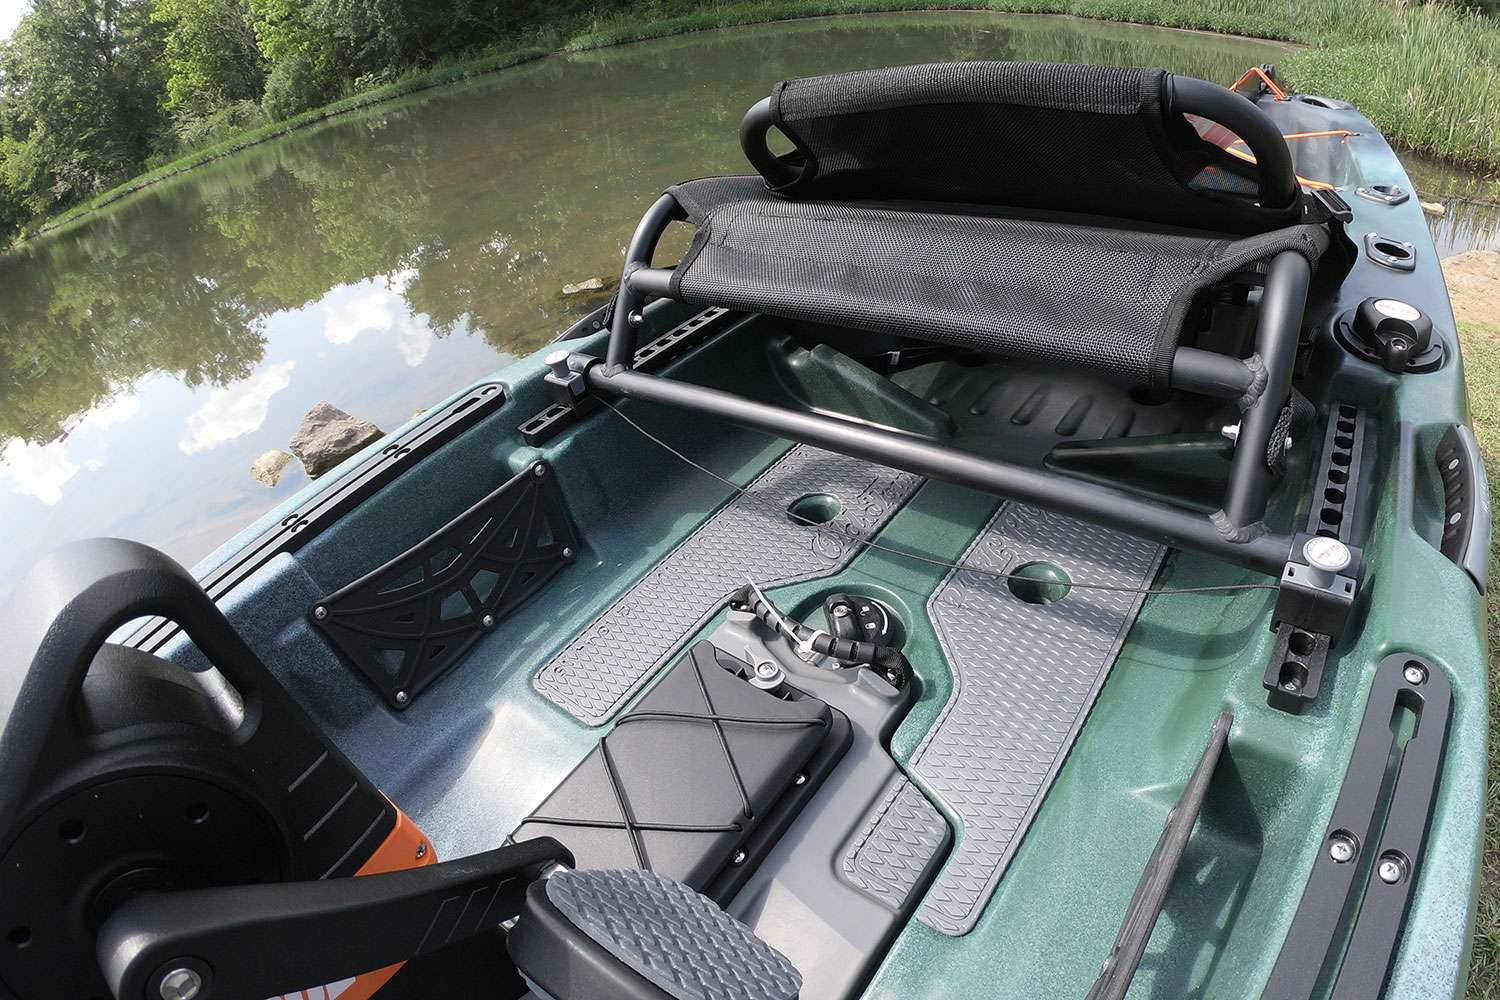 Here's a good look at where you keep your feet when fishing. Plenty of room and it offers ample comfort for extended days on the water. 